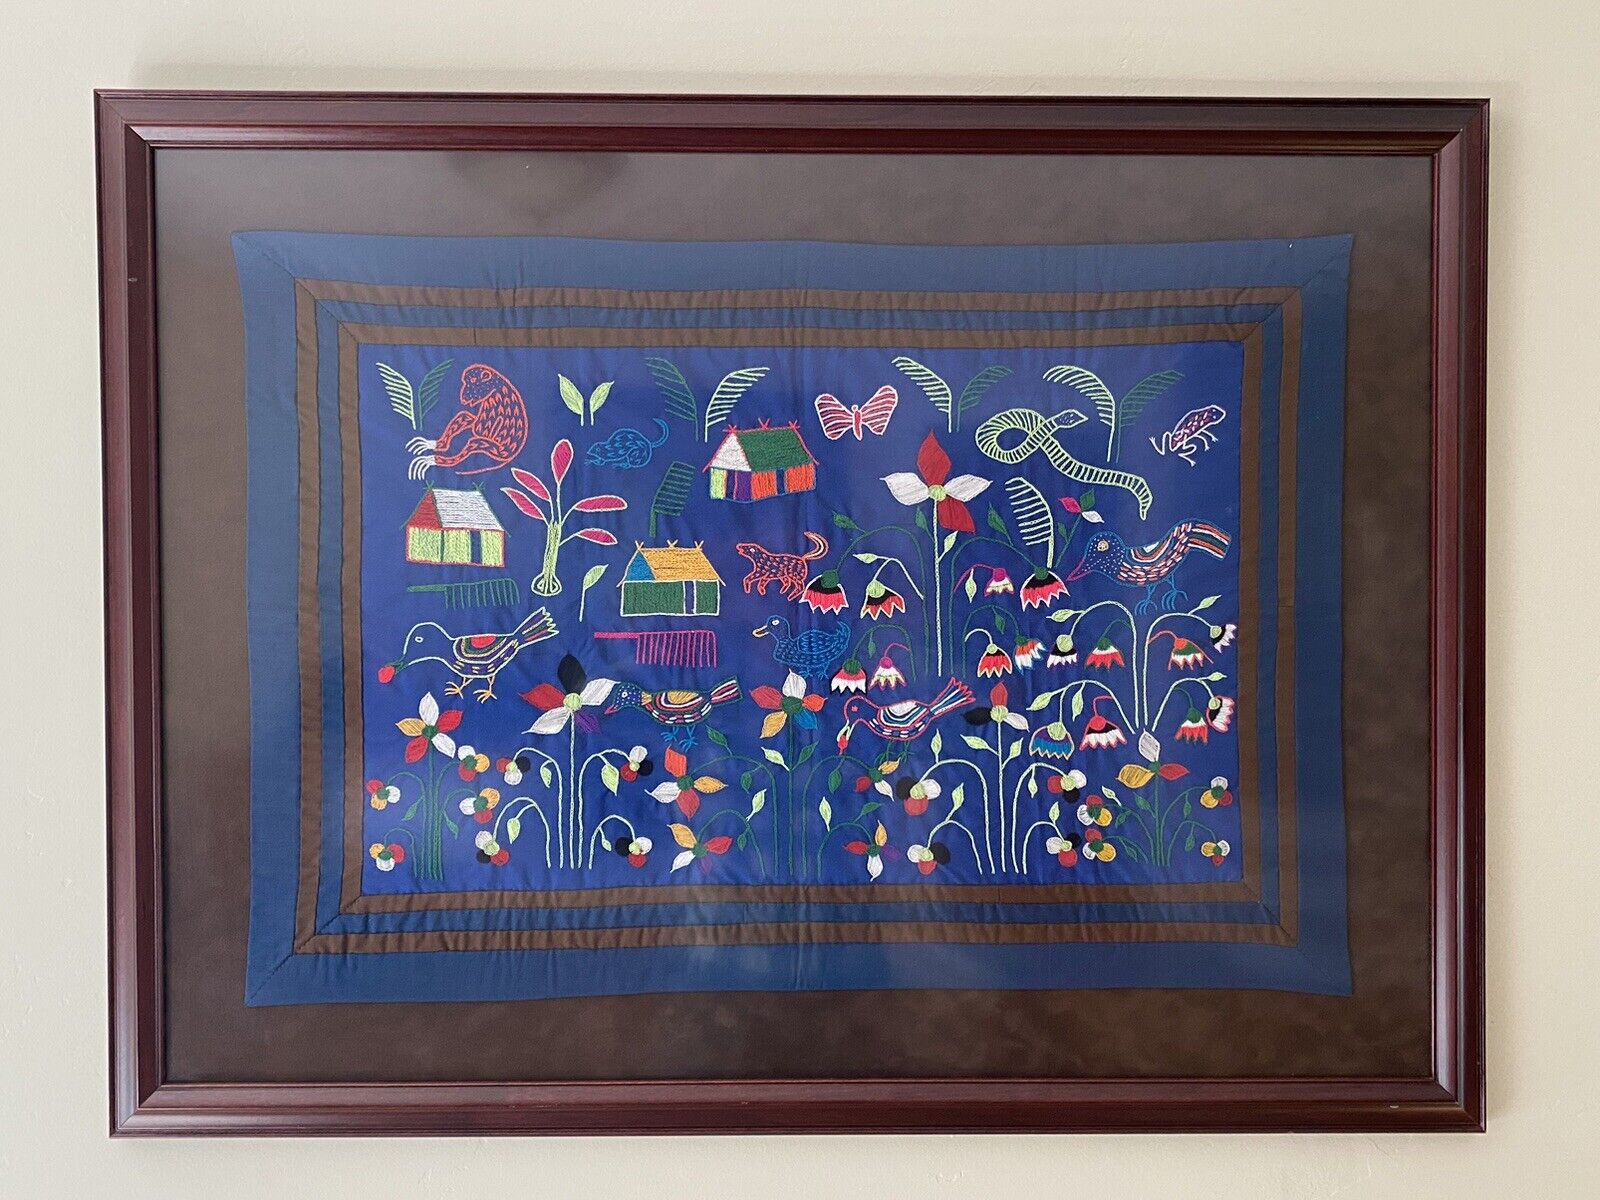 Traditional Hmong Embroidery Medium  Colorful Story Cloth Jungle Scene Framed